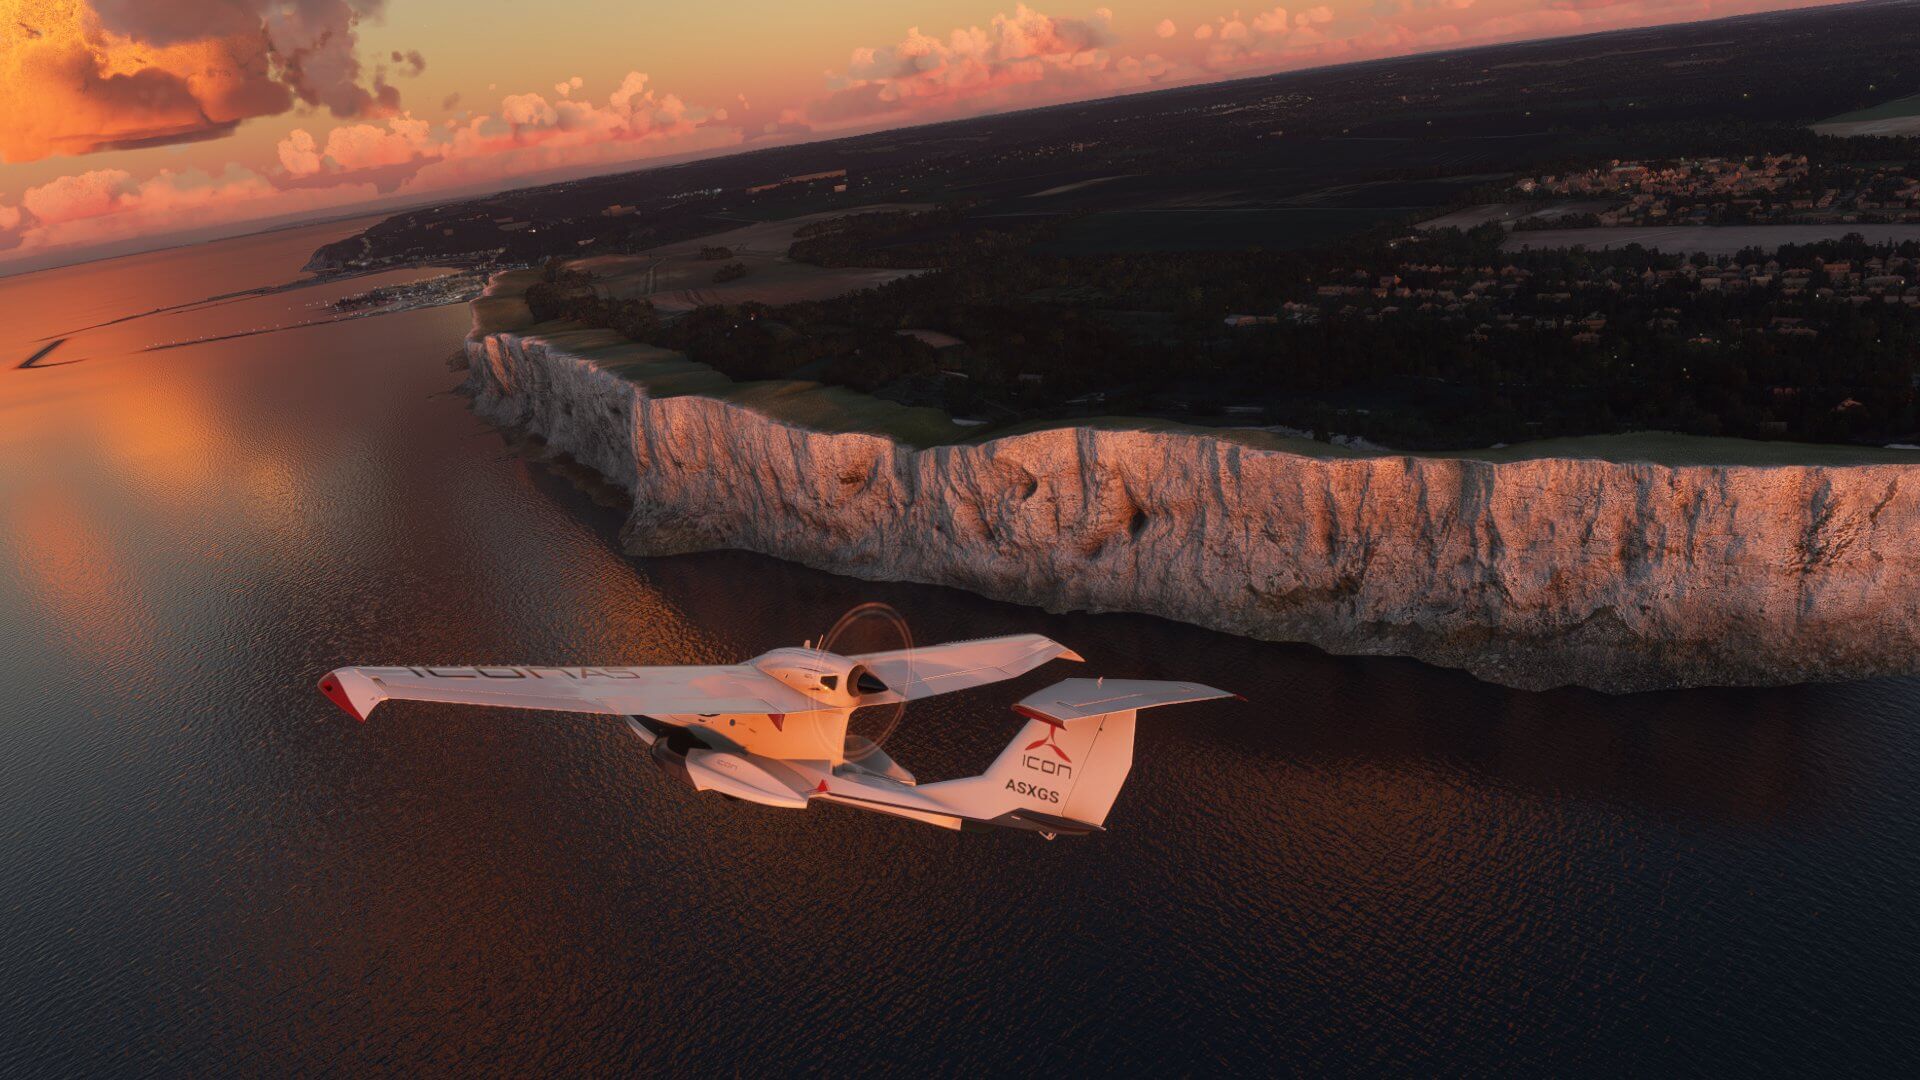 The Icon A5 banks right whilst flying next to the white cliffs of Dover, England